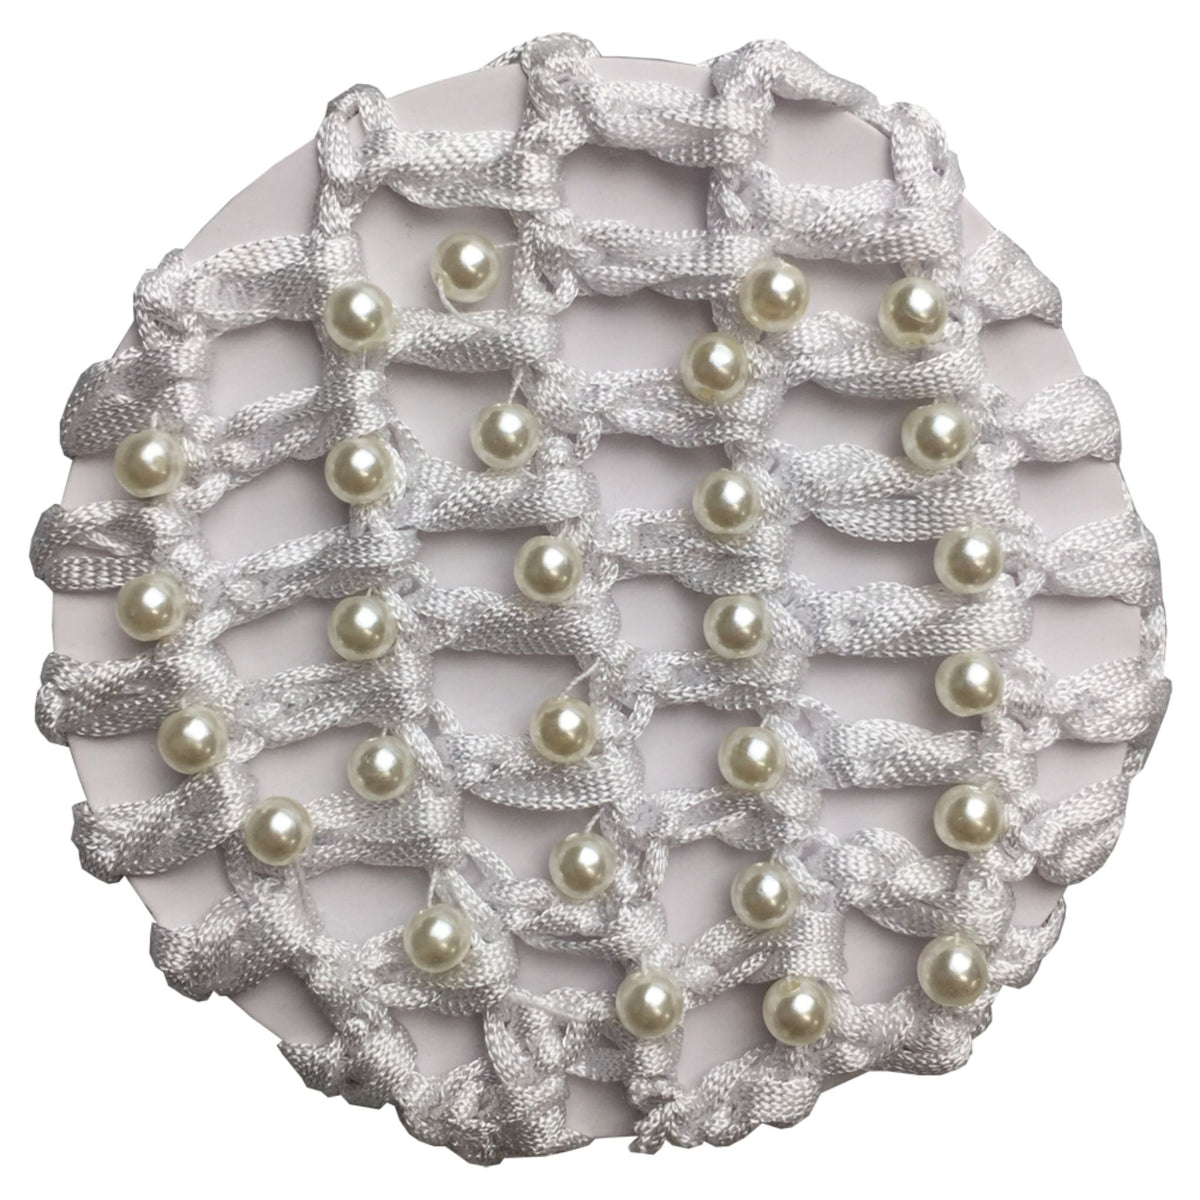 White Hairnet With Pearls.